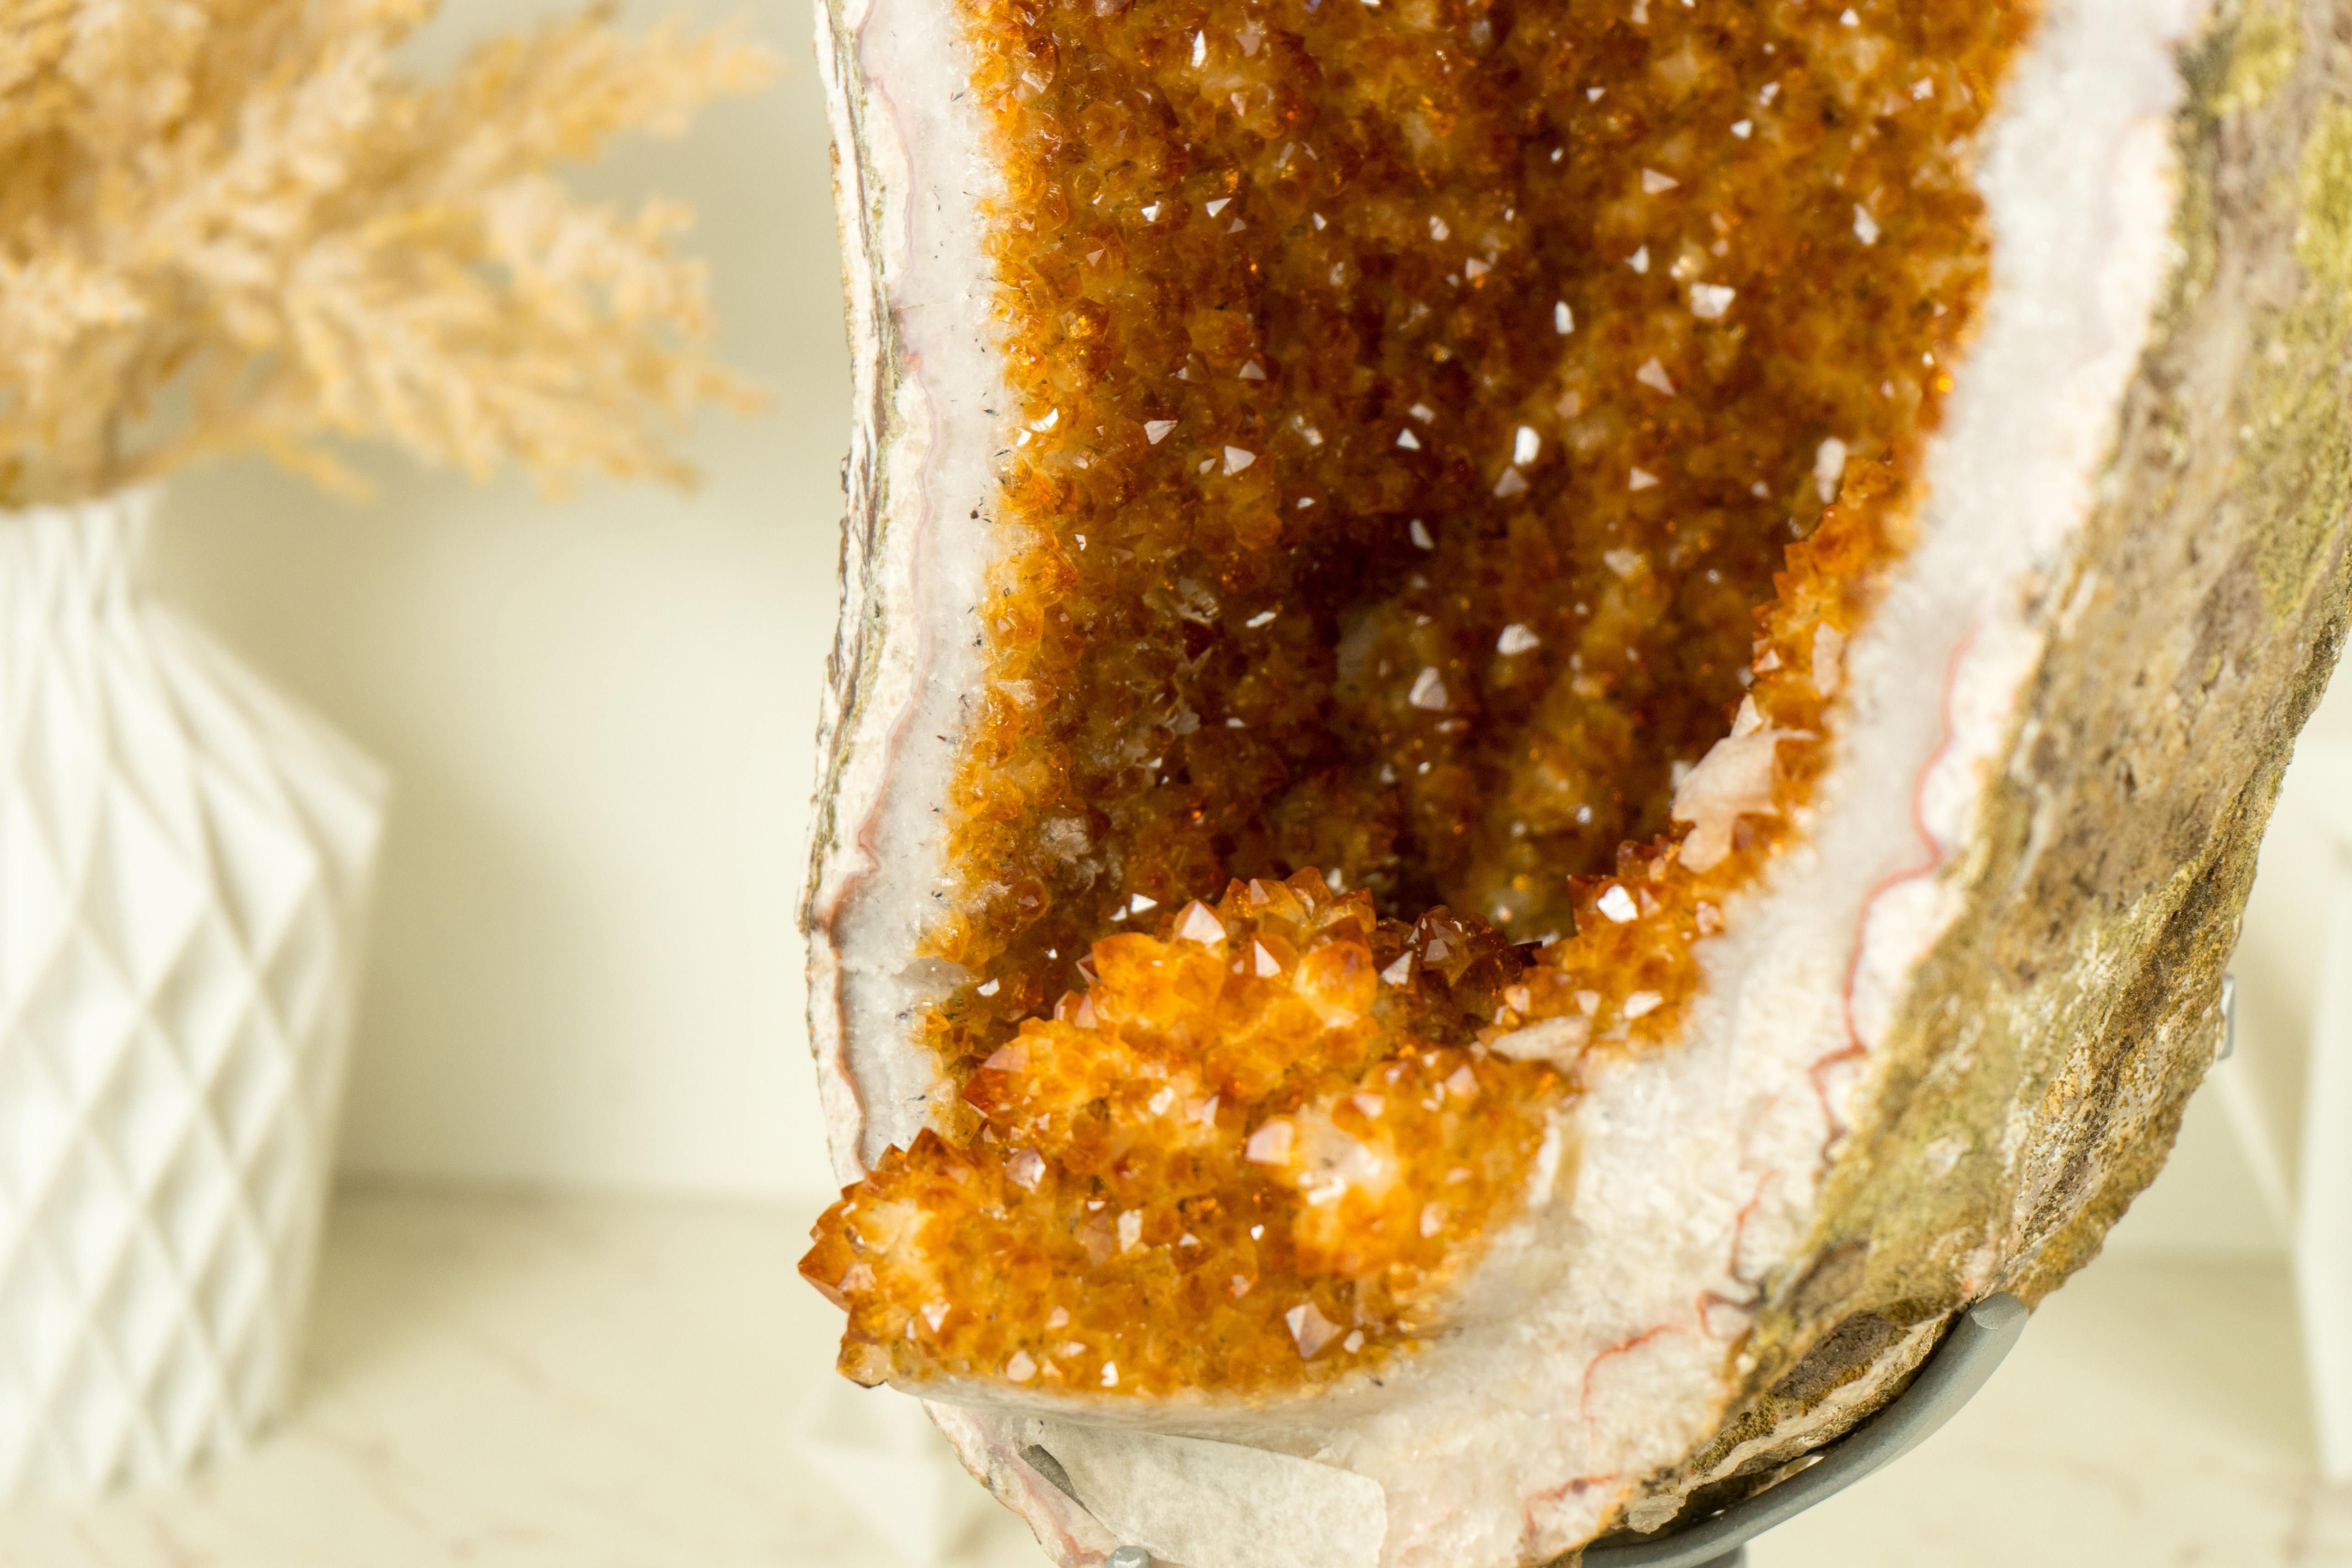 Citrine Geode with Stalactite Flower Formations and Deep Orange Citrine Crystal For Sale 1